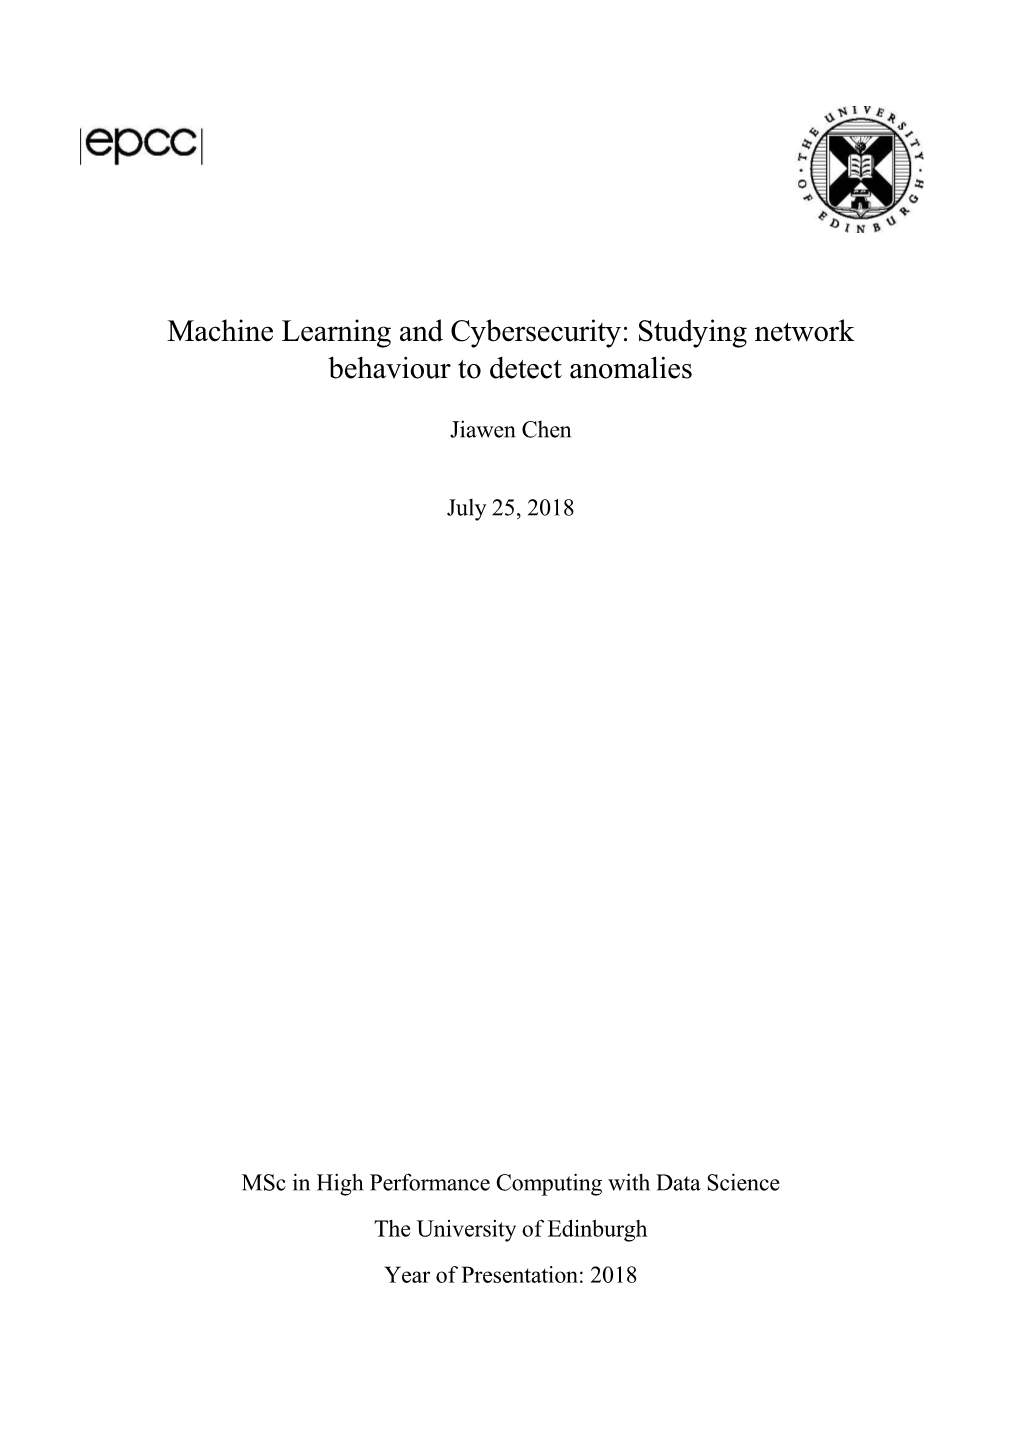 Machine Learning and Cybersecurity: Studying Network Behaviour to Detect Anomalies